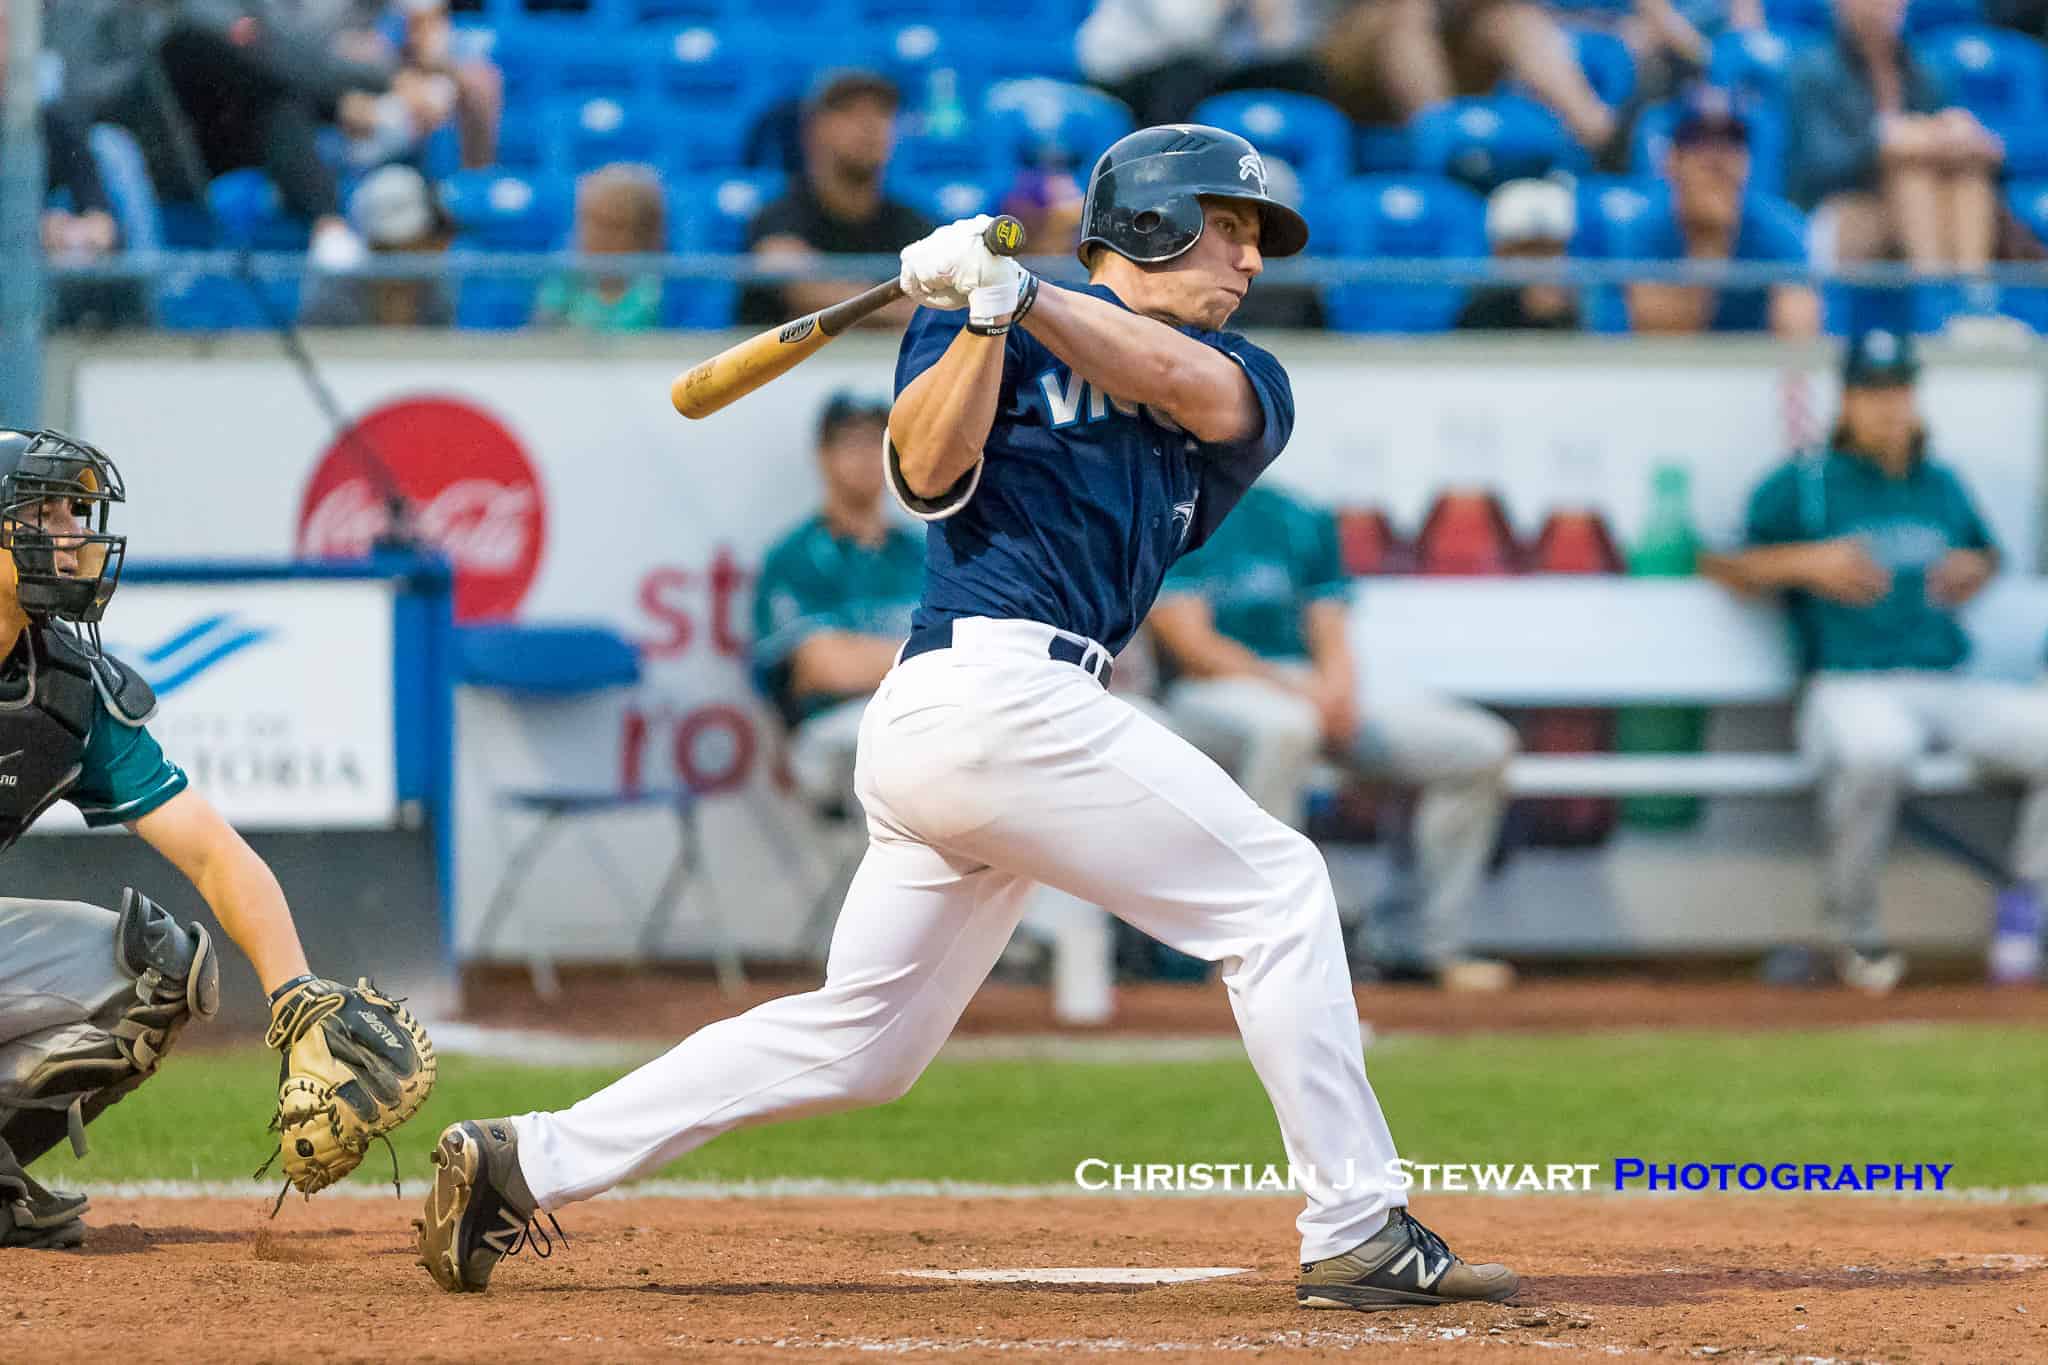 HarbourCats Rebound for Key Win Over Bells, Jump Back into First